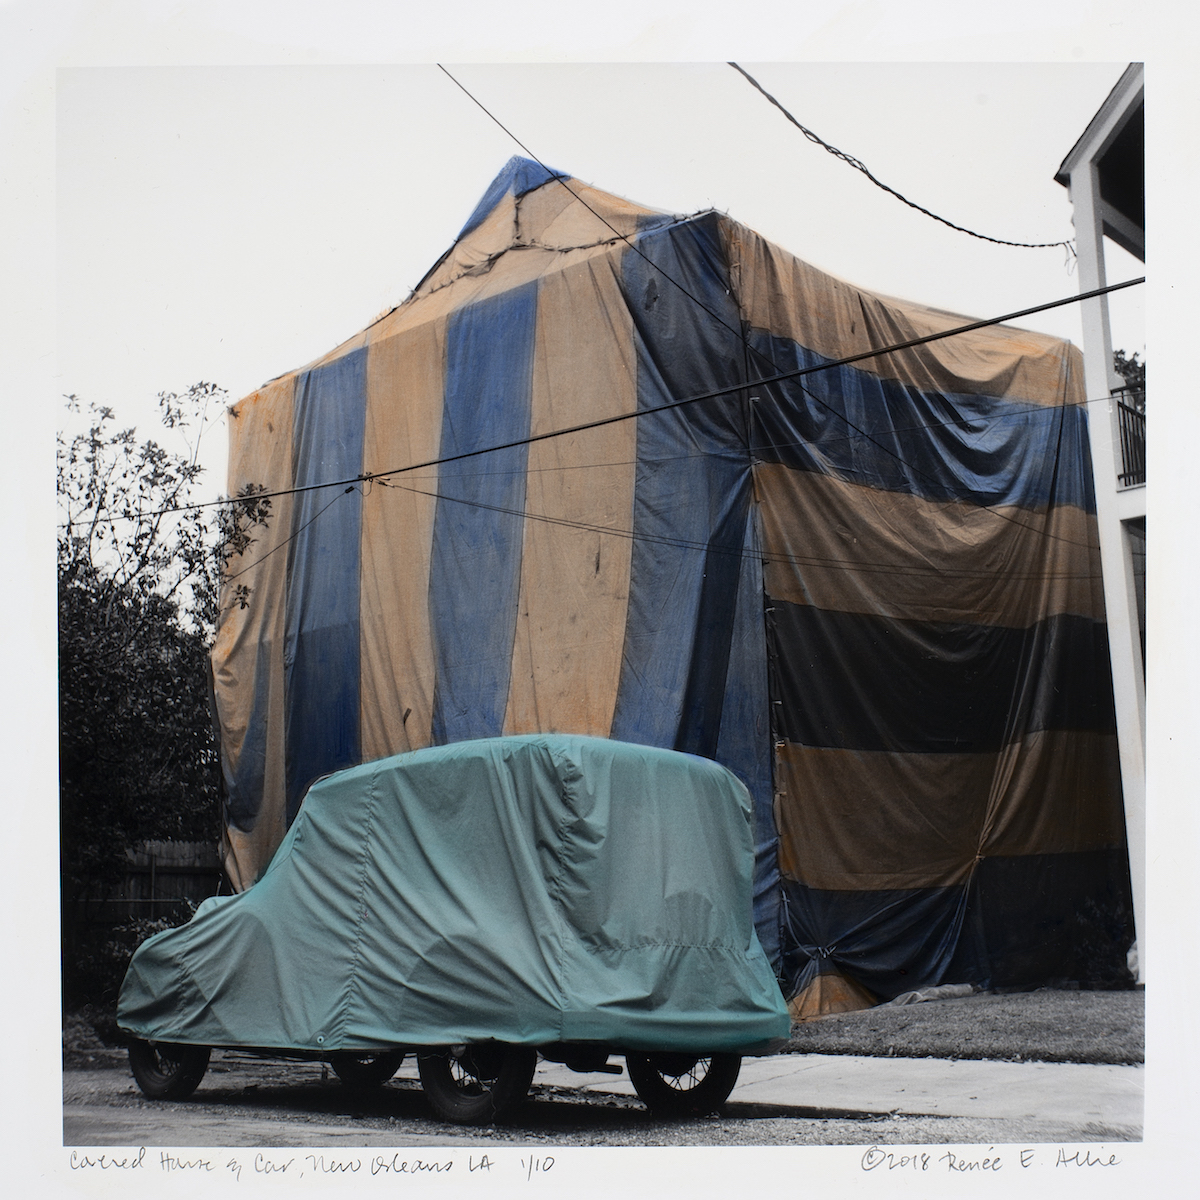 Renee Allie, Covered House & Car, New Orleans, LA, 2018. Collection of the artist. Courtesy of Ogden Museum of Southern Art